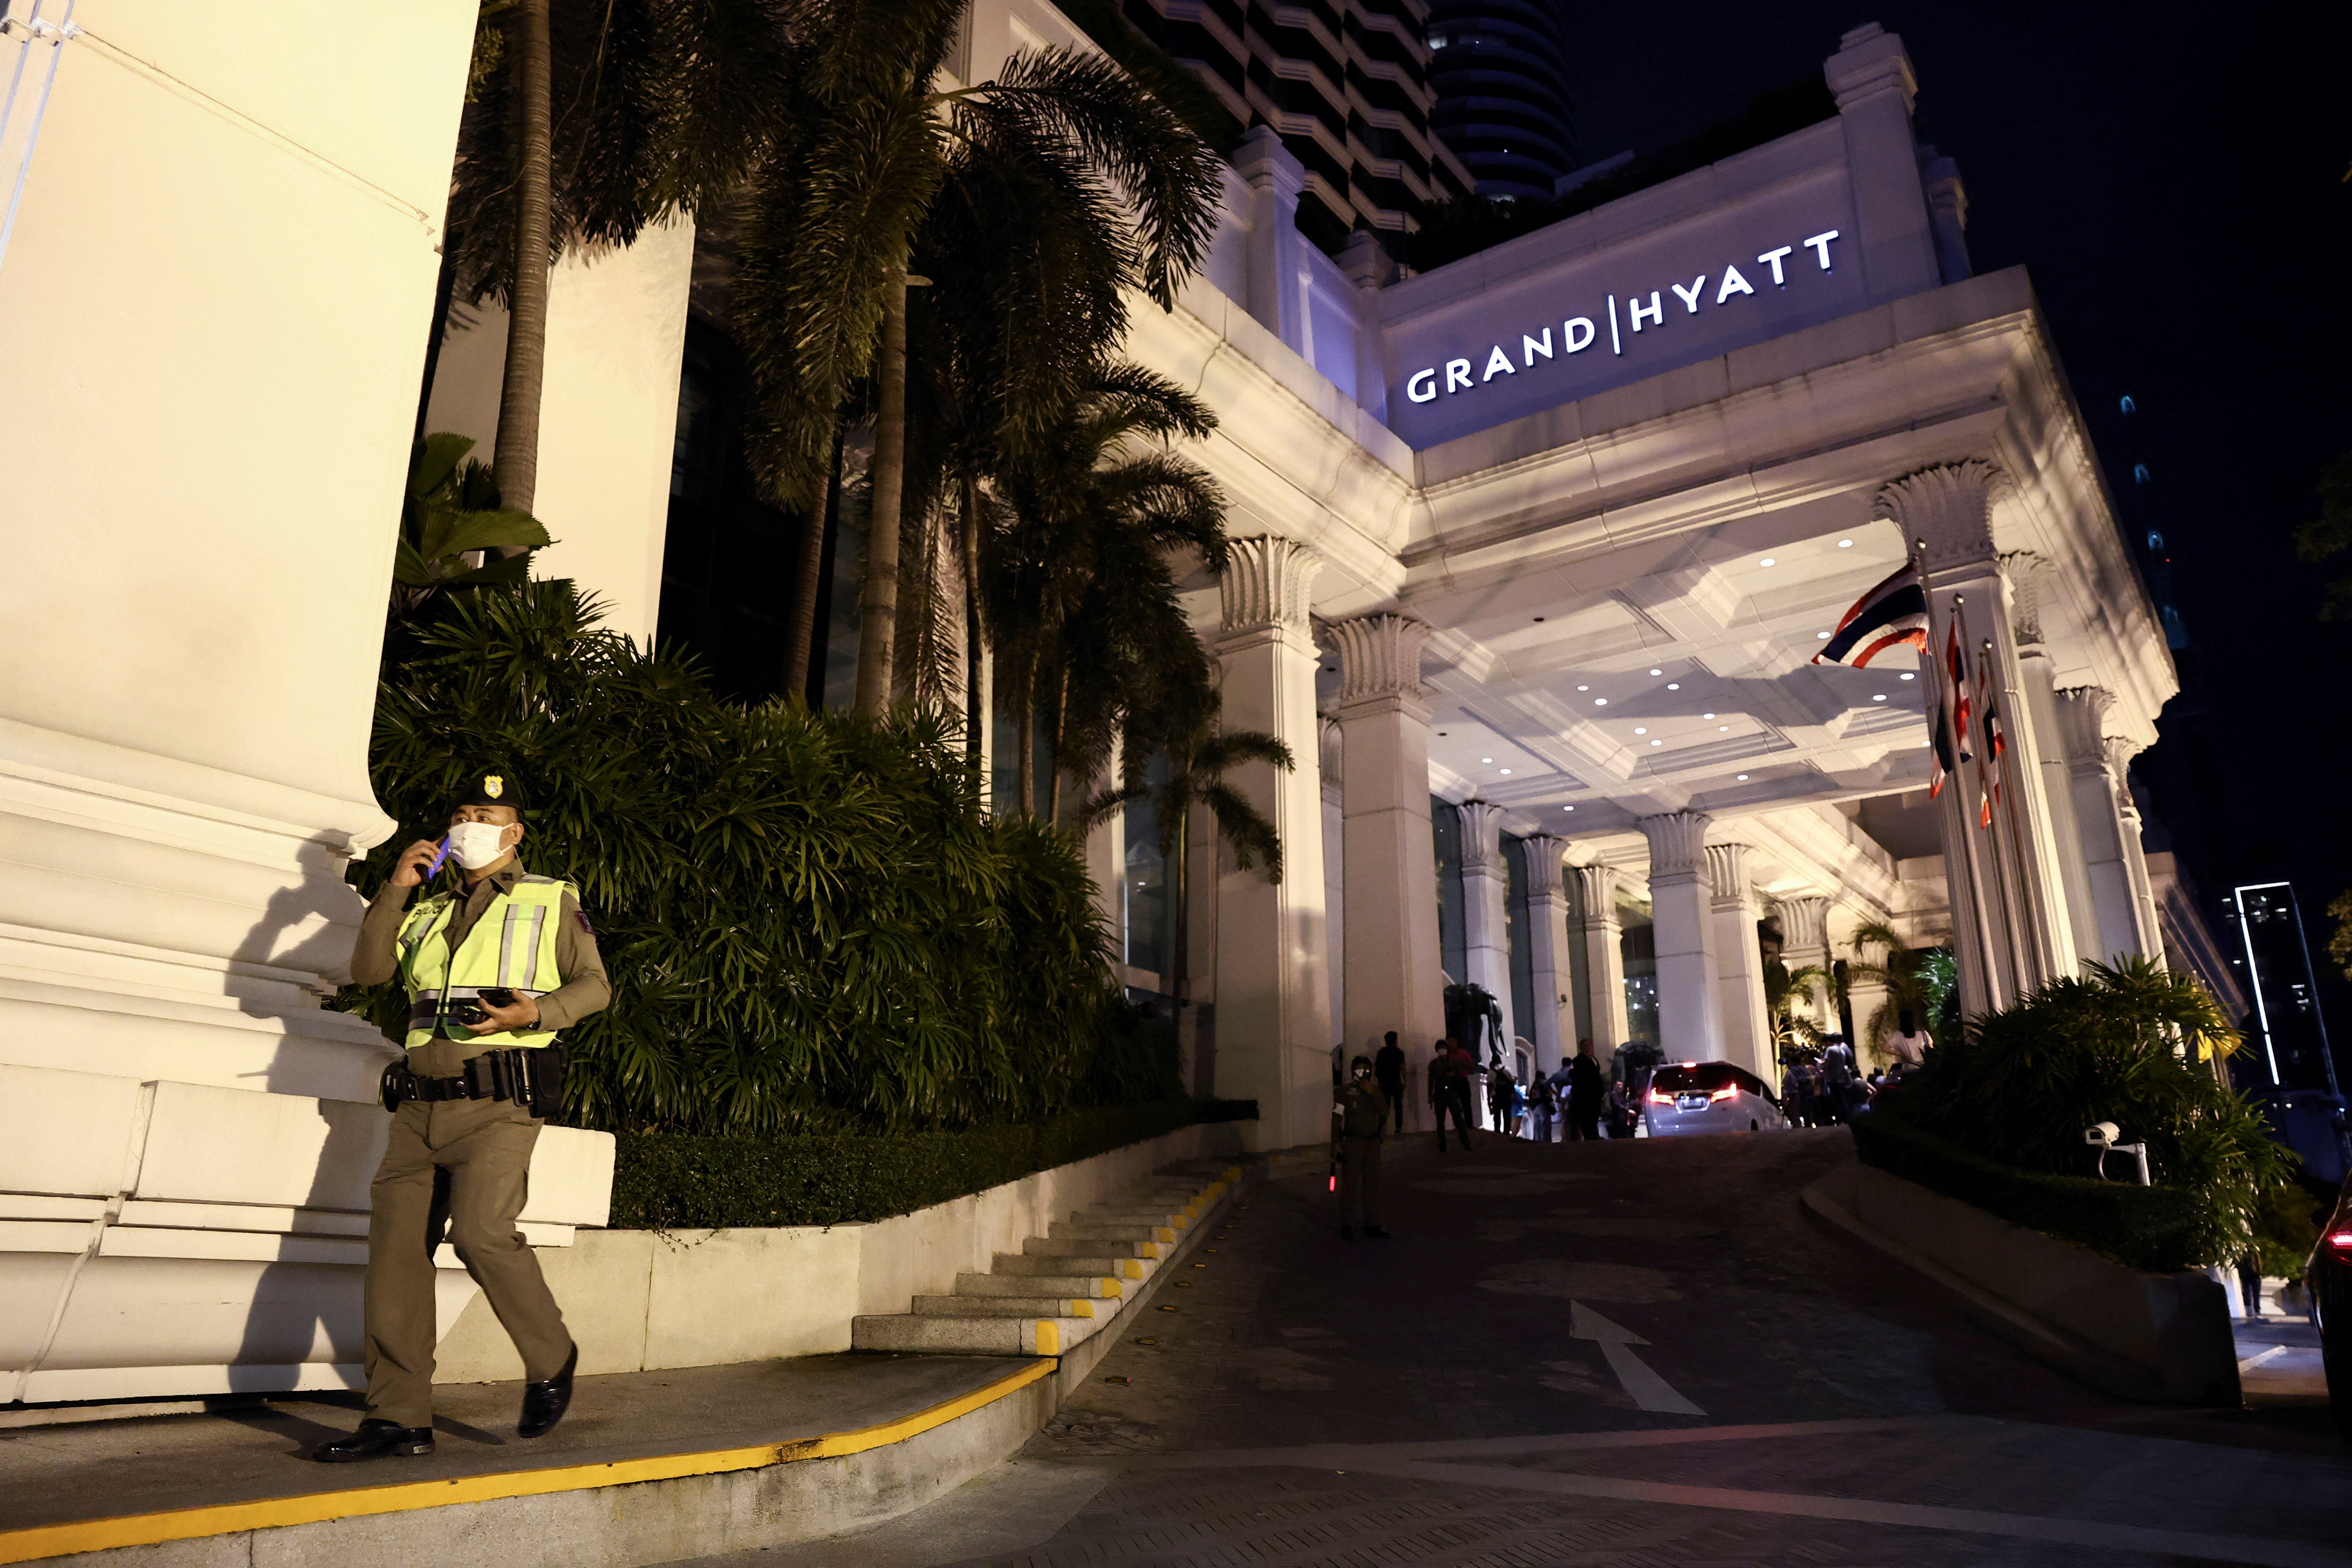 A general view of Grand Hyatt Erawan hotel, which believed that at least 6 people have been reported dead, in Bangkok